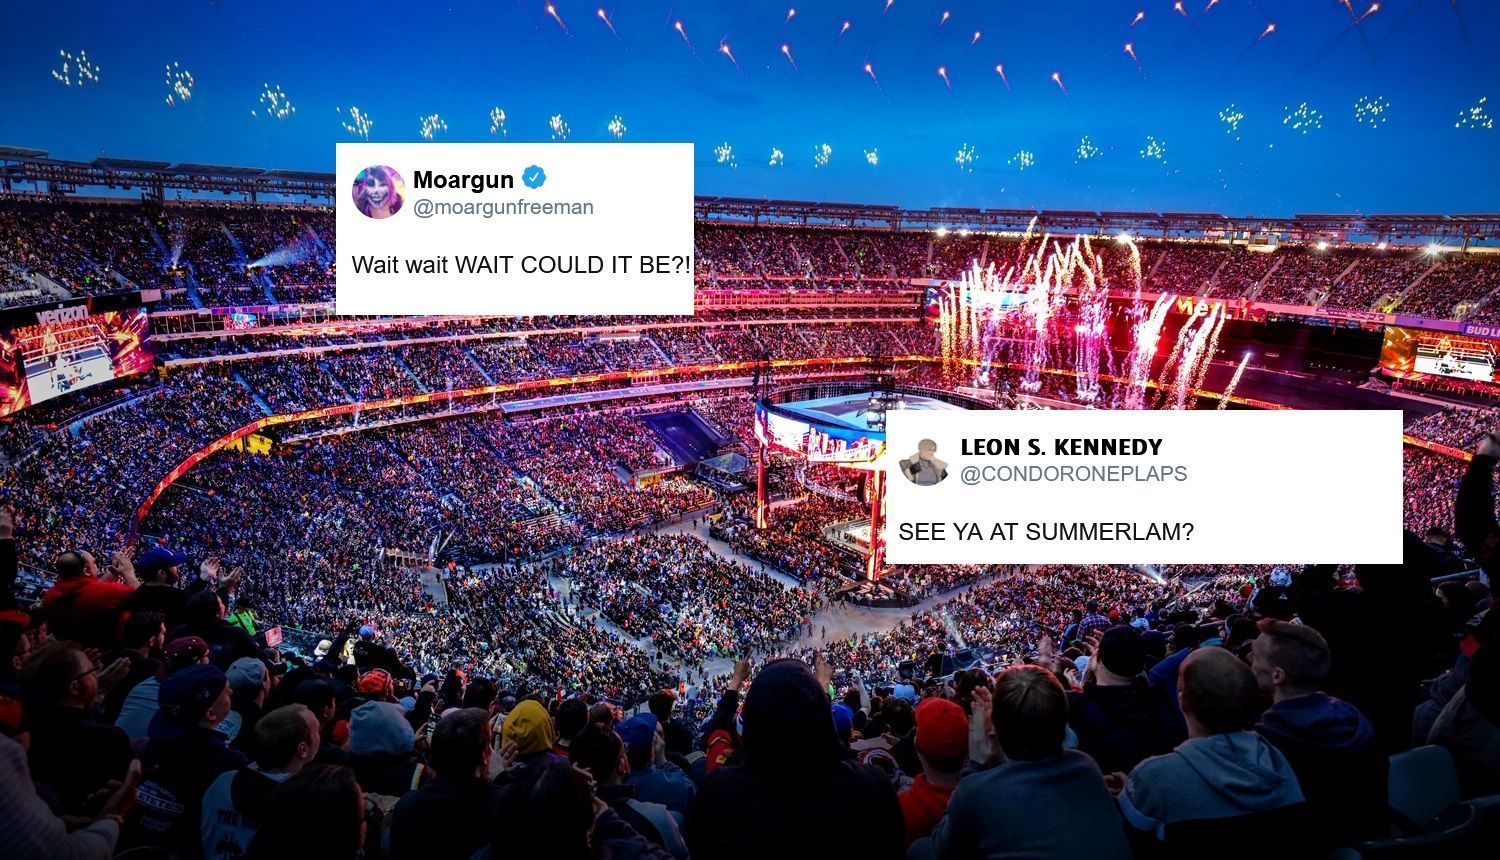 WWE SummerSlam could host some surprises this year.